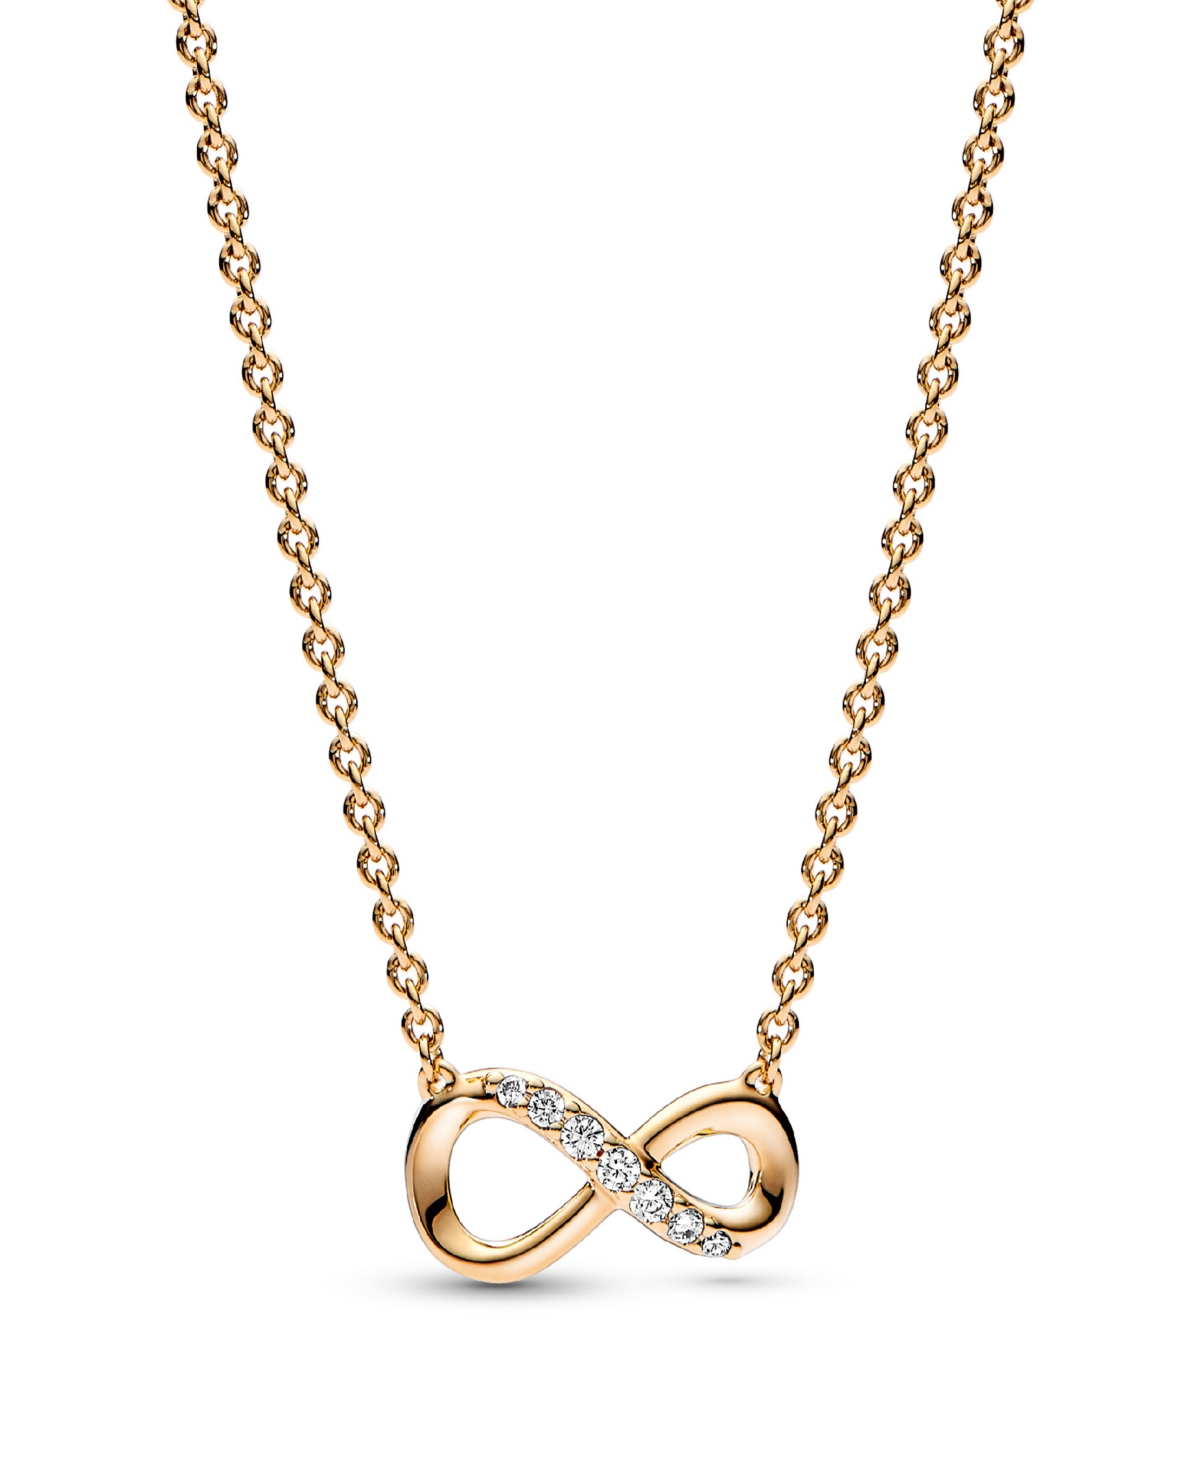 Pandora Moments 14k Gold-plated Sparkling Cubic Zirconia Infinity Collier Necklace